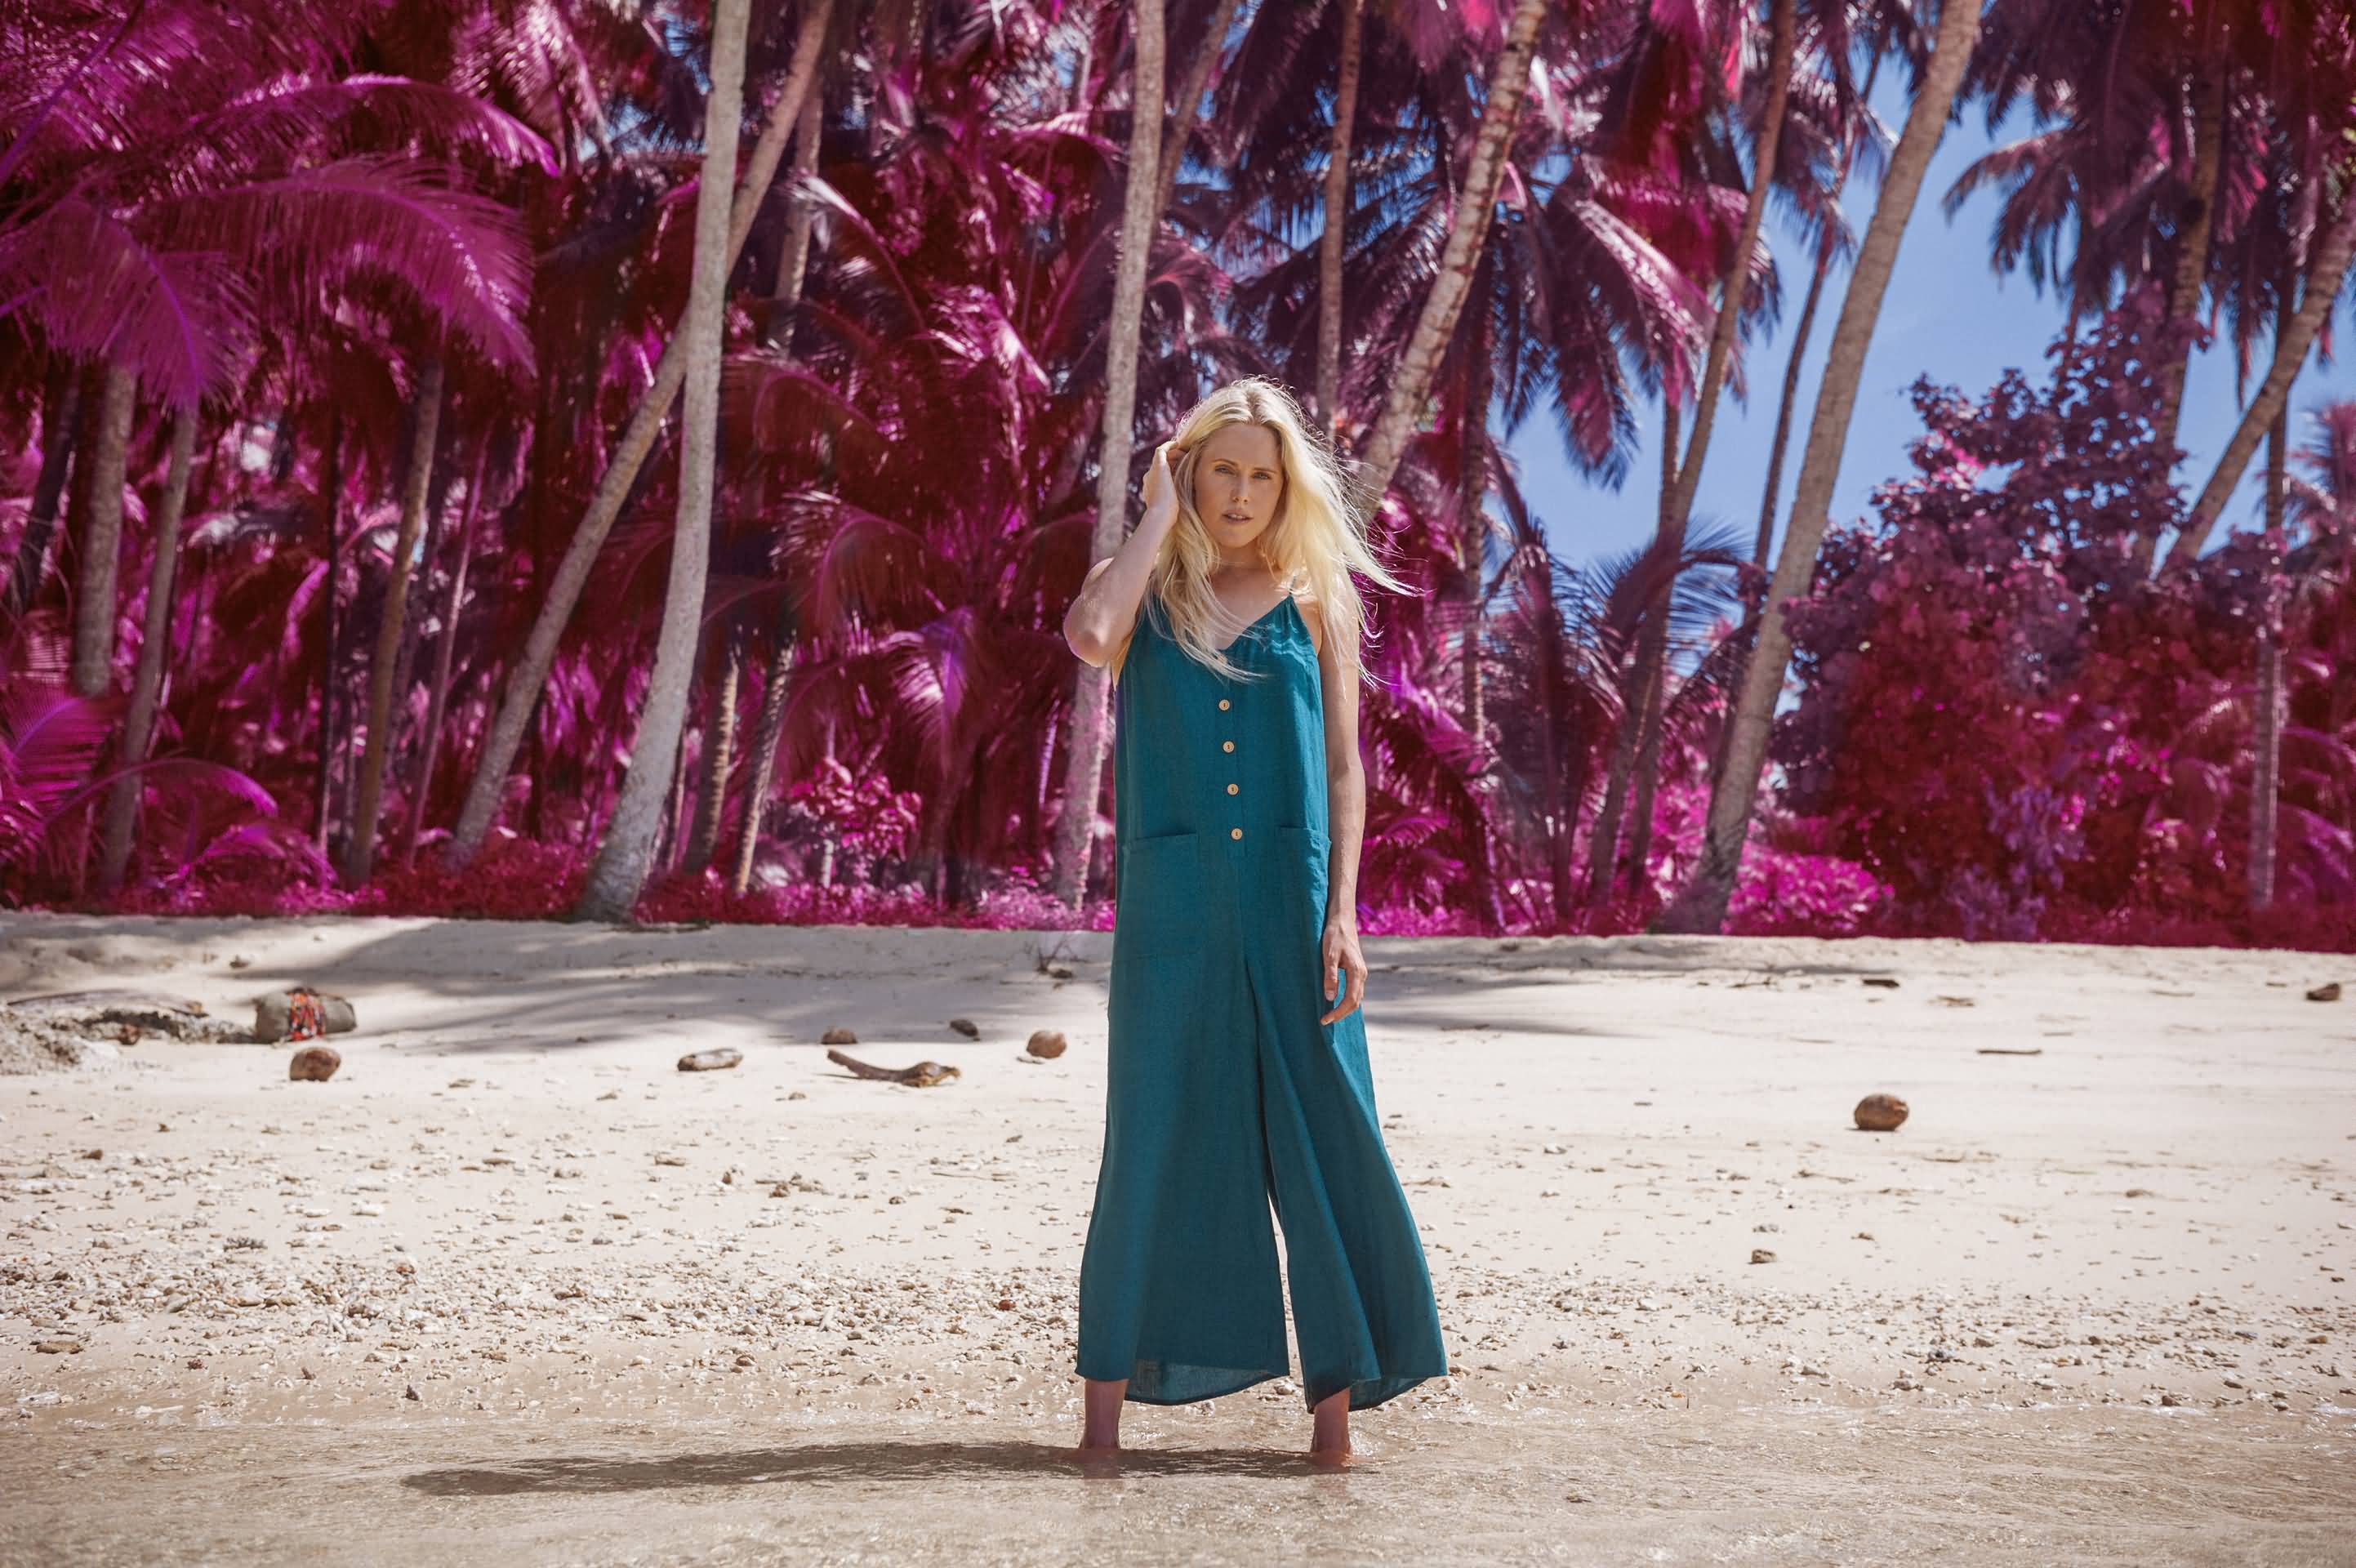 Billabong 2019 | Introducing The Creatures of Color Collection